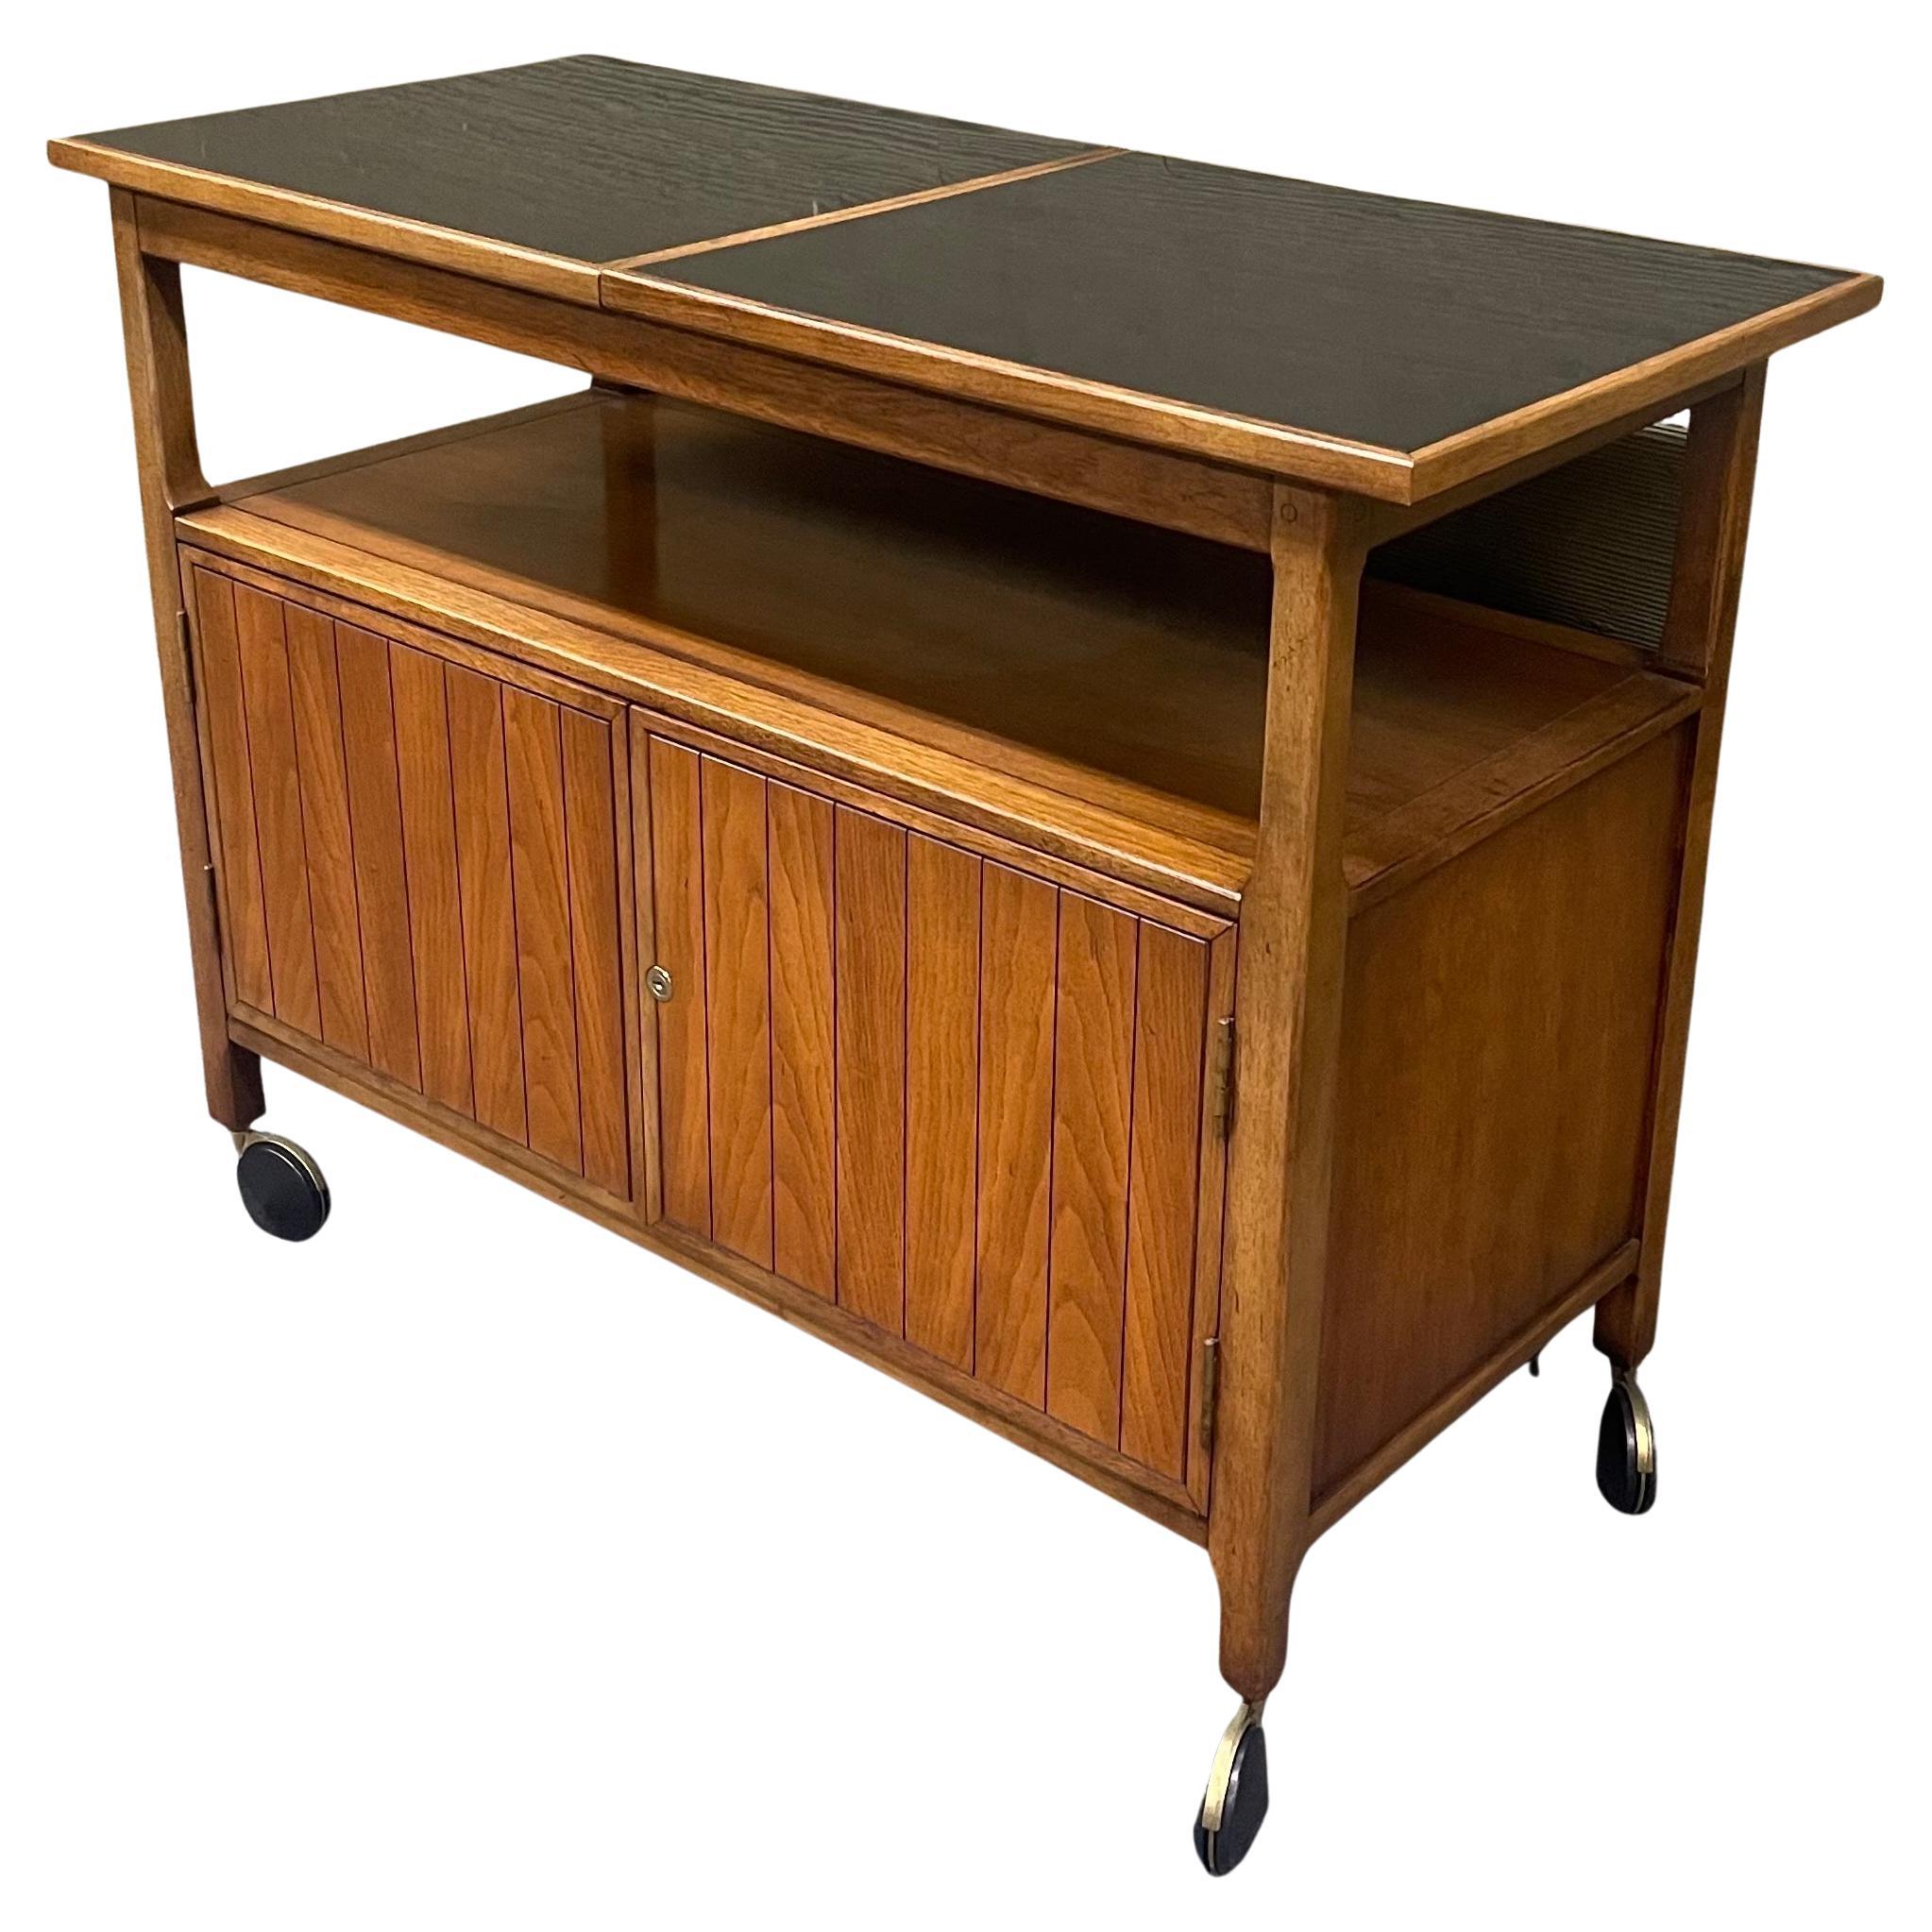 A unique Mid-Century Modern American walnut and black laminate expanding bar cart, circa 1970s. The piece is in good vintage condition and measures 40.25